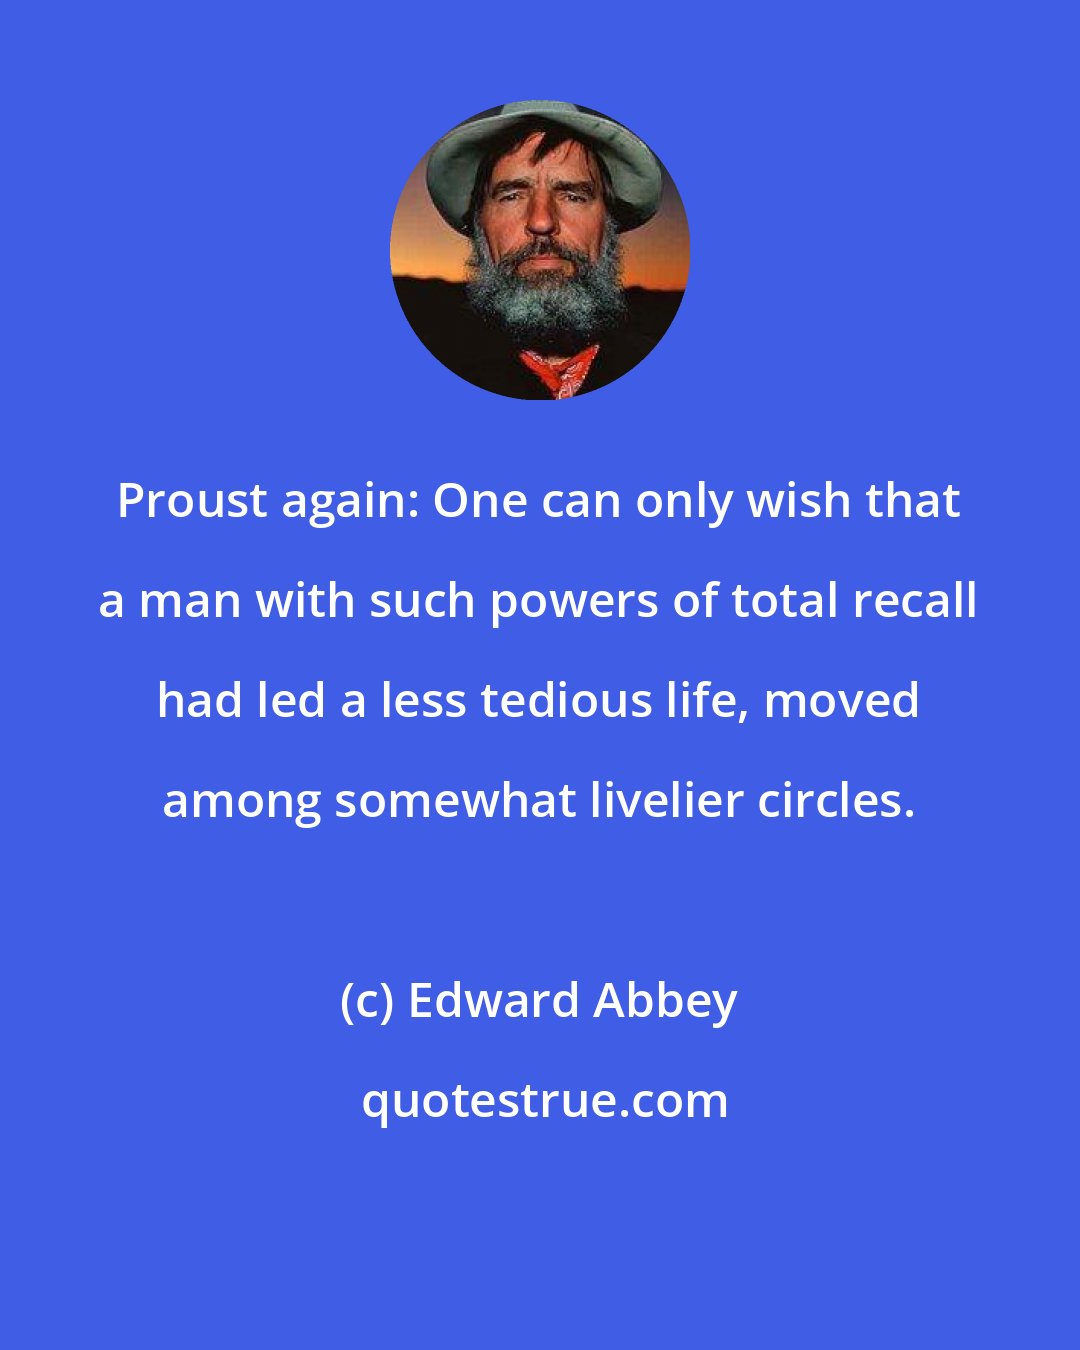 Edward Abbey: Proust again: One can only wish that a man with such powers of total recall had led a less tedious life, moved among somewhat livelier circles.